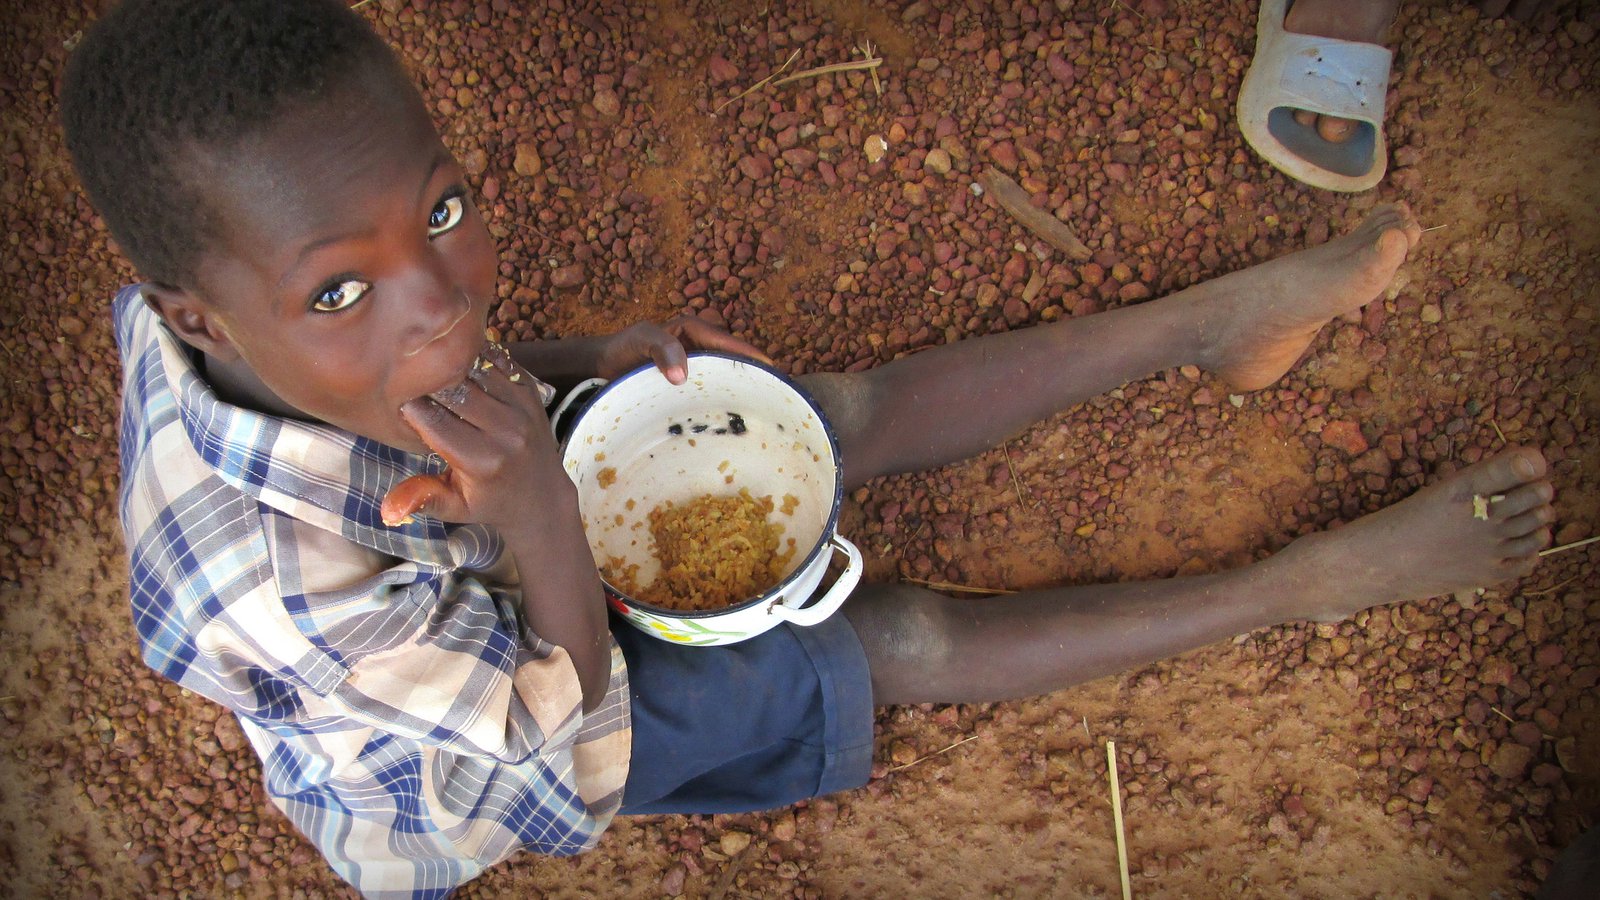 why are other countries unable to send enough food to african countries during times of famine